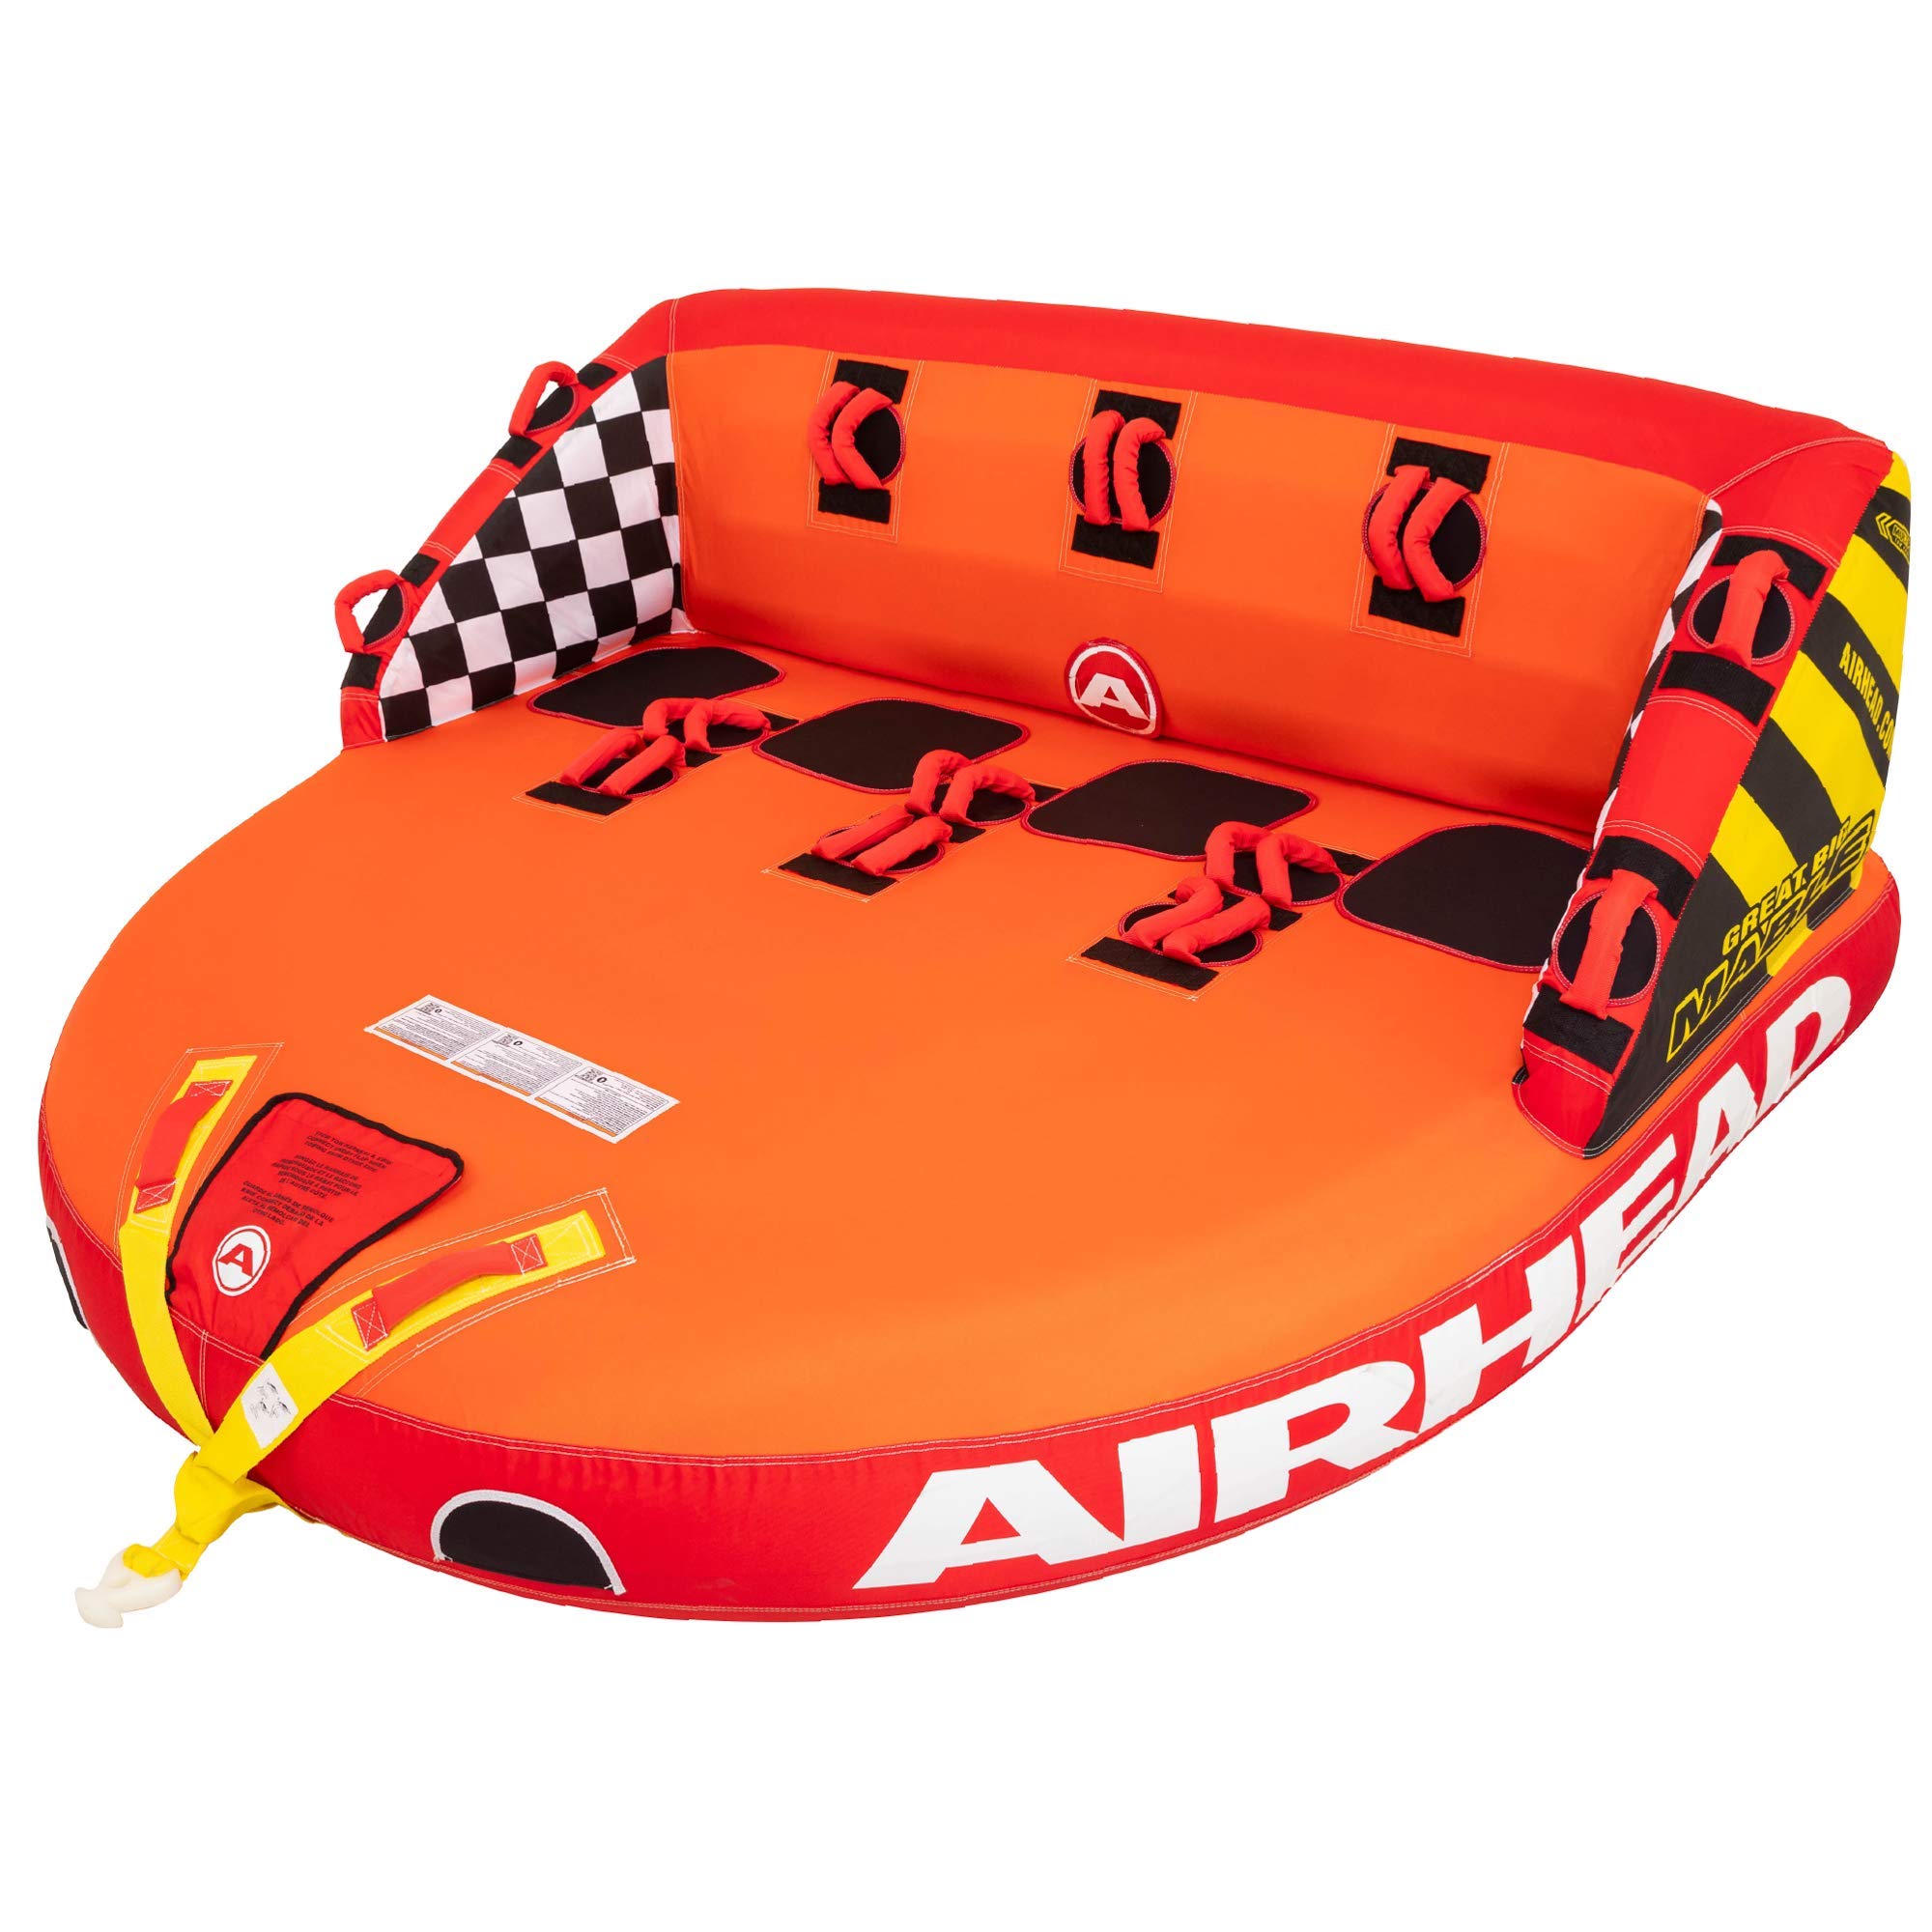 AIRHEAD Great Big Mable | 1-4 Rider Towable Tube for Boating